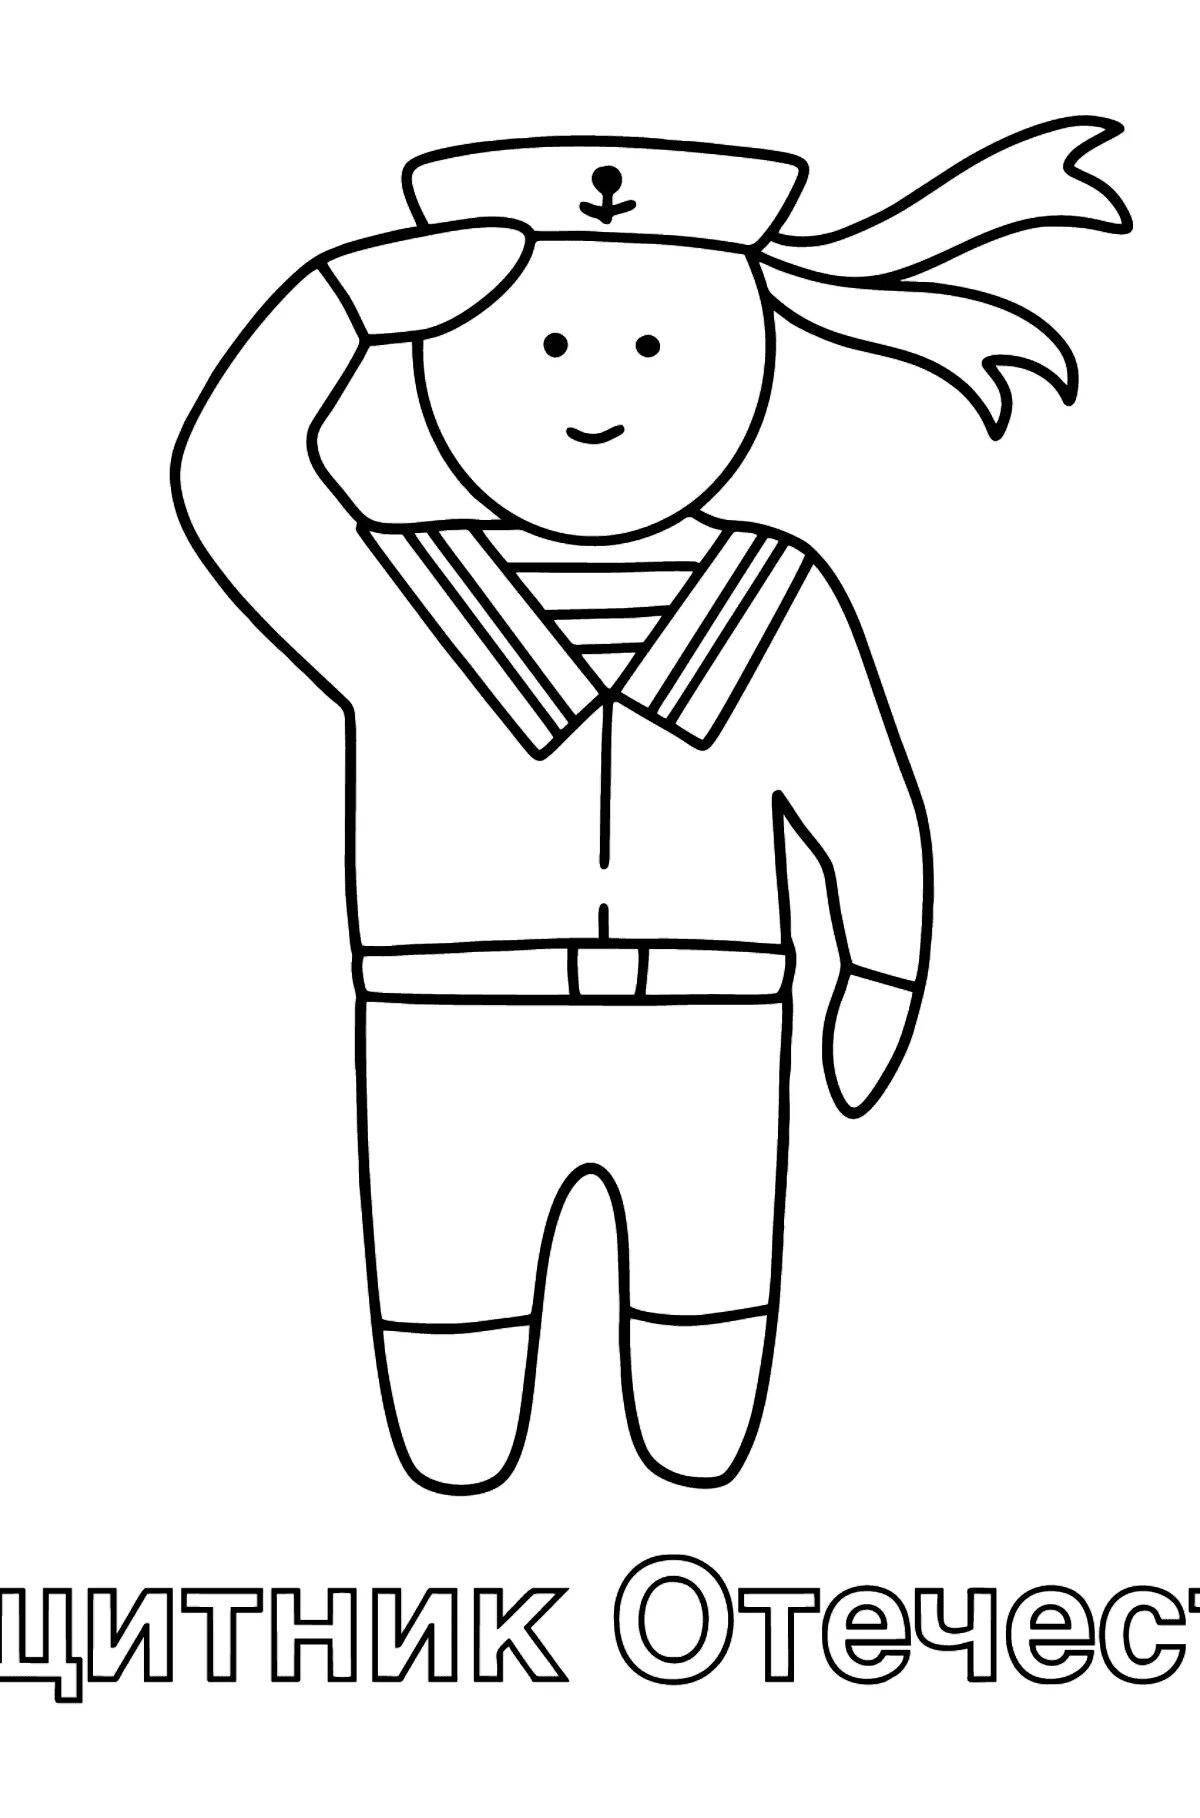 Colorful sailor coloring page for kids